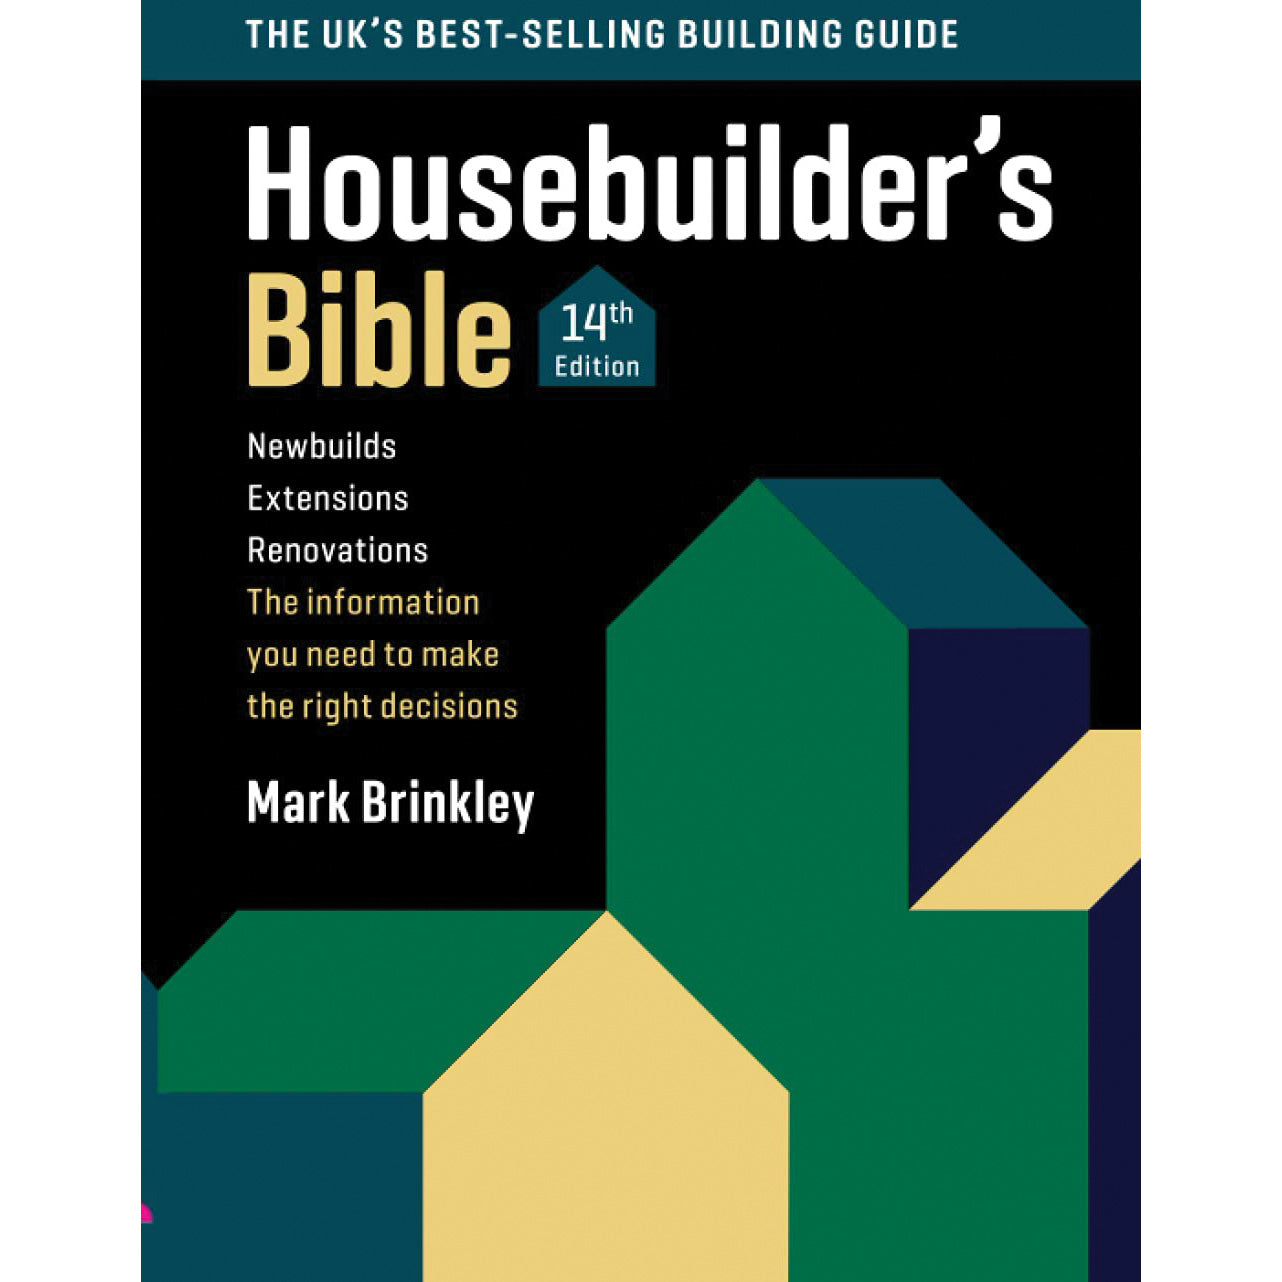 The Housebuilder's Bible 14: 14th Edition